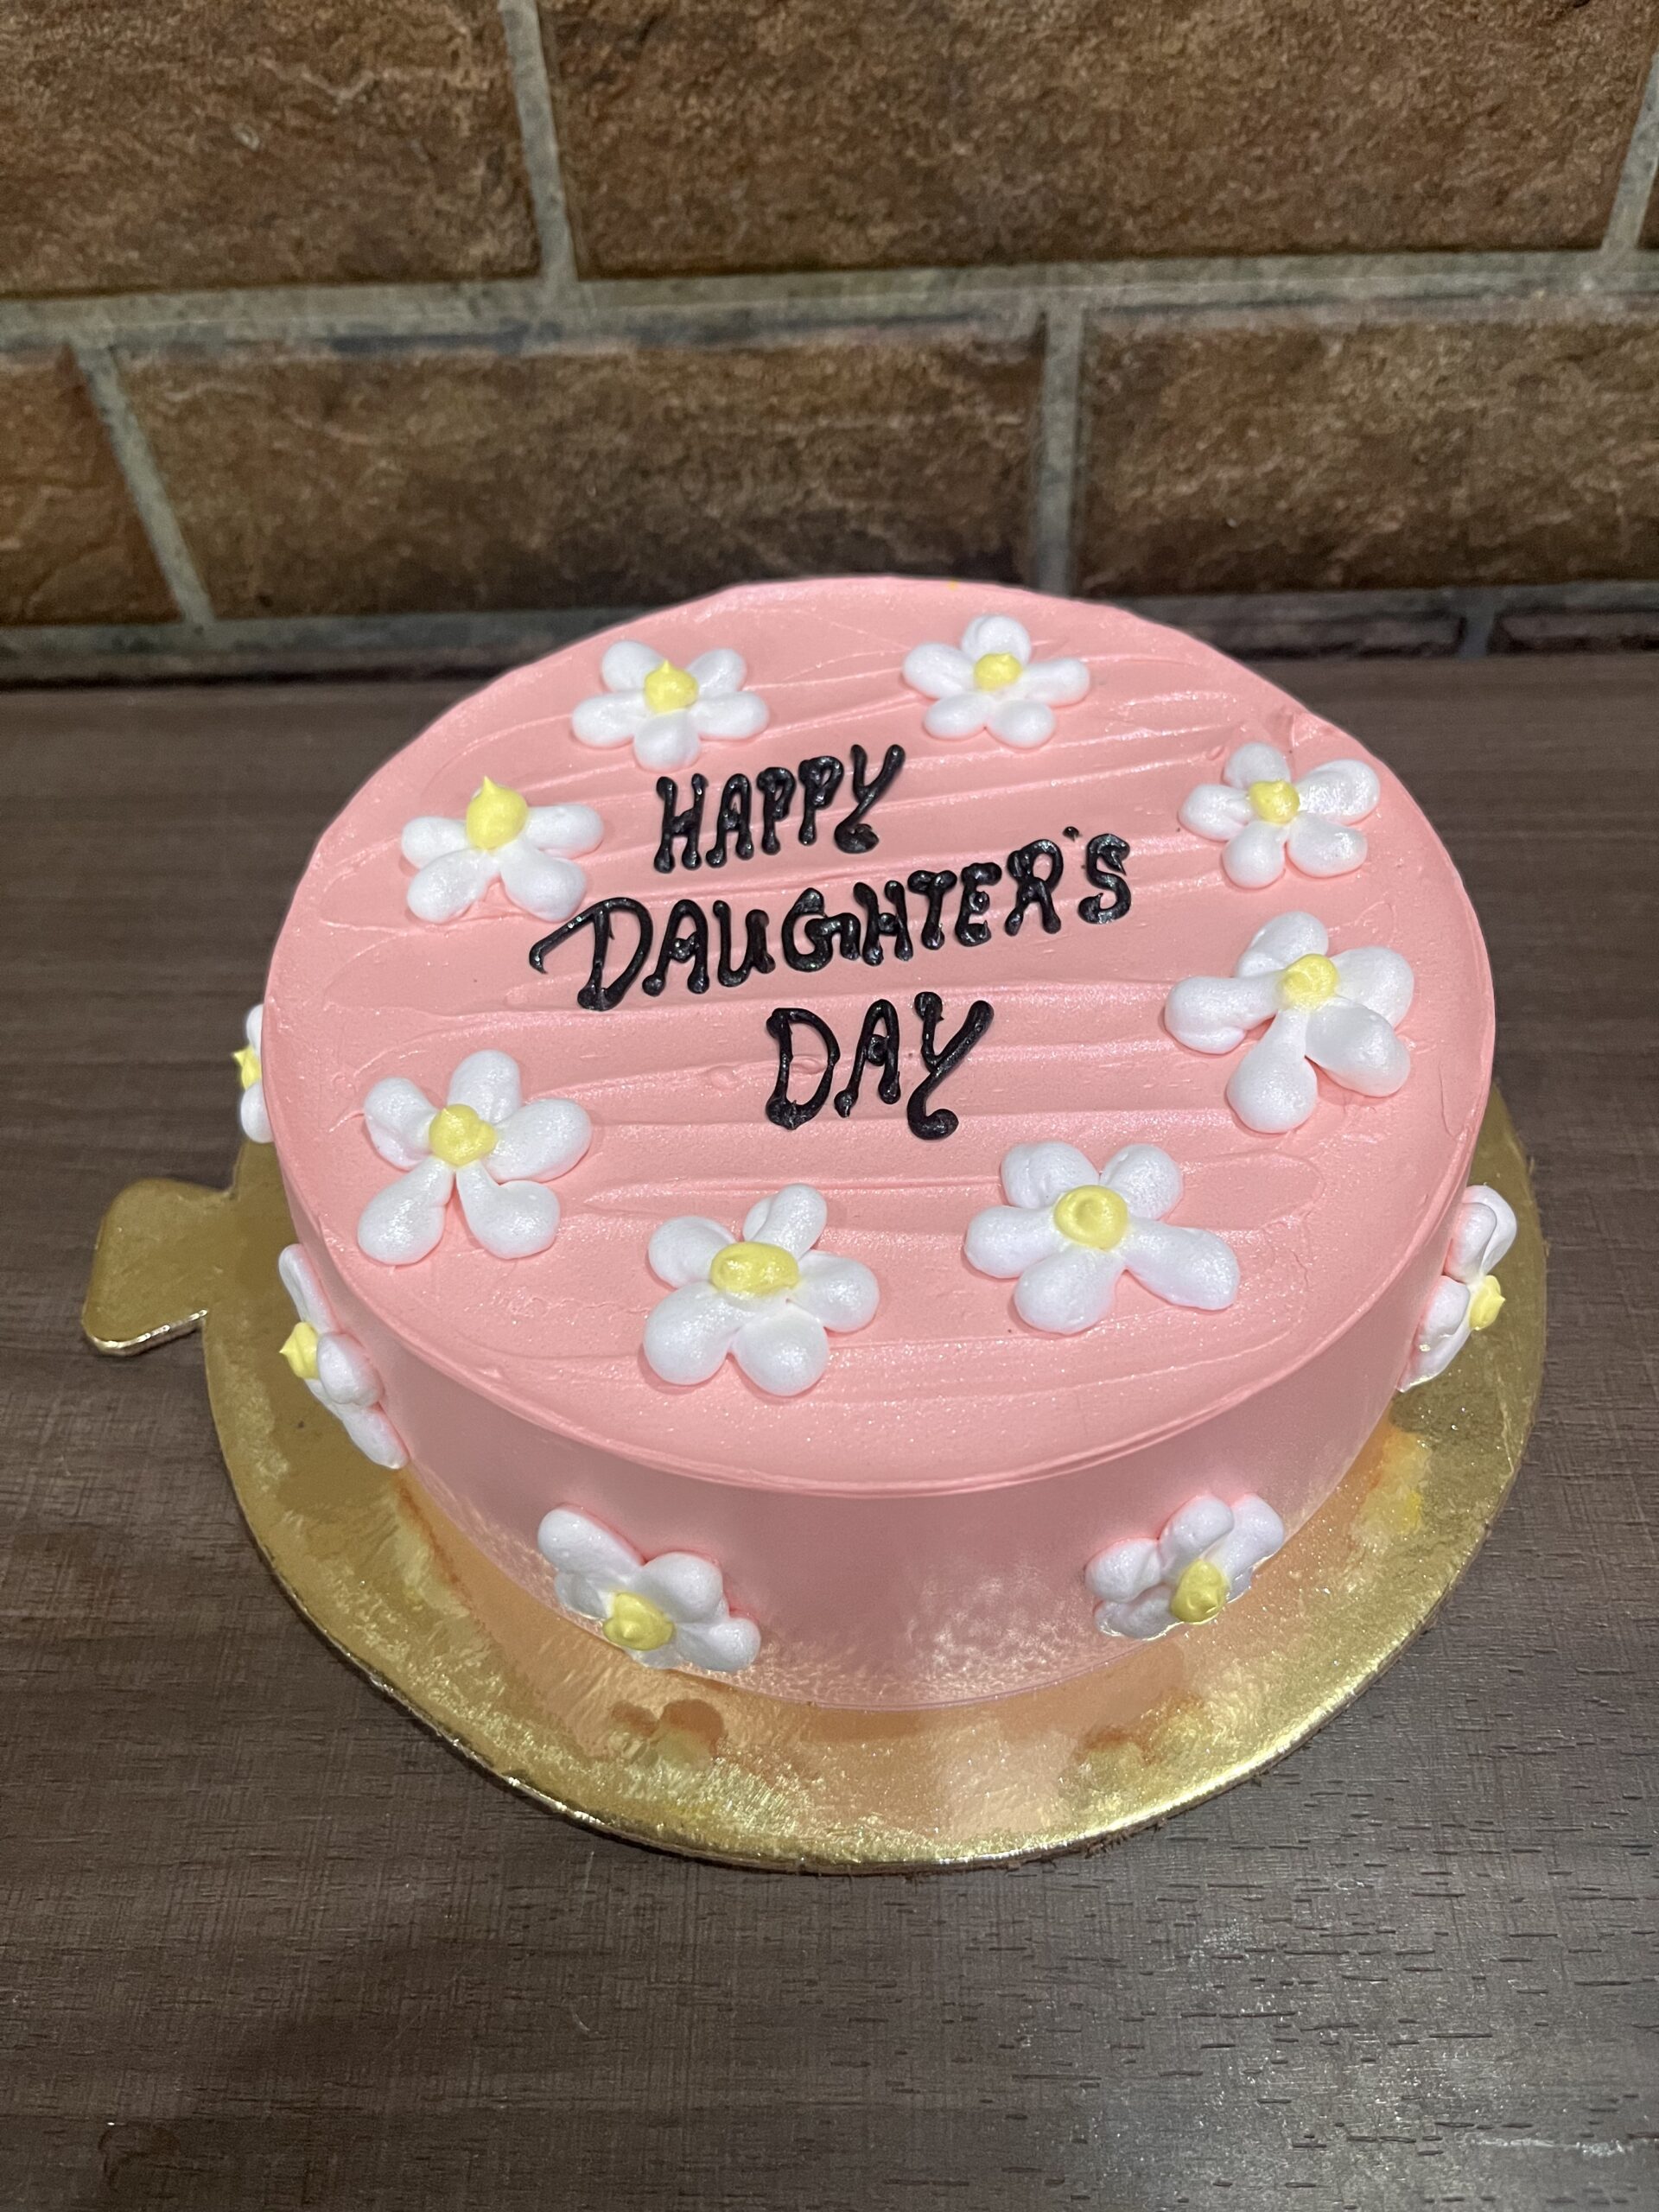 Chocolate cake with buttercream flowers – ThoodlesDoodles